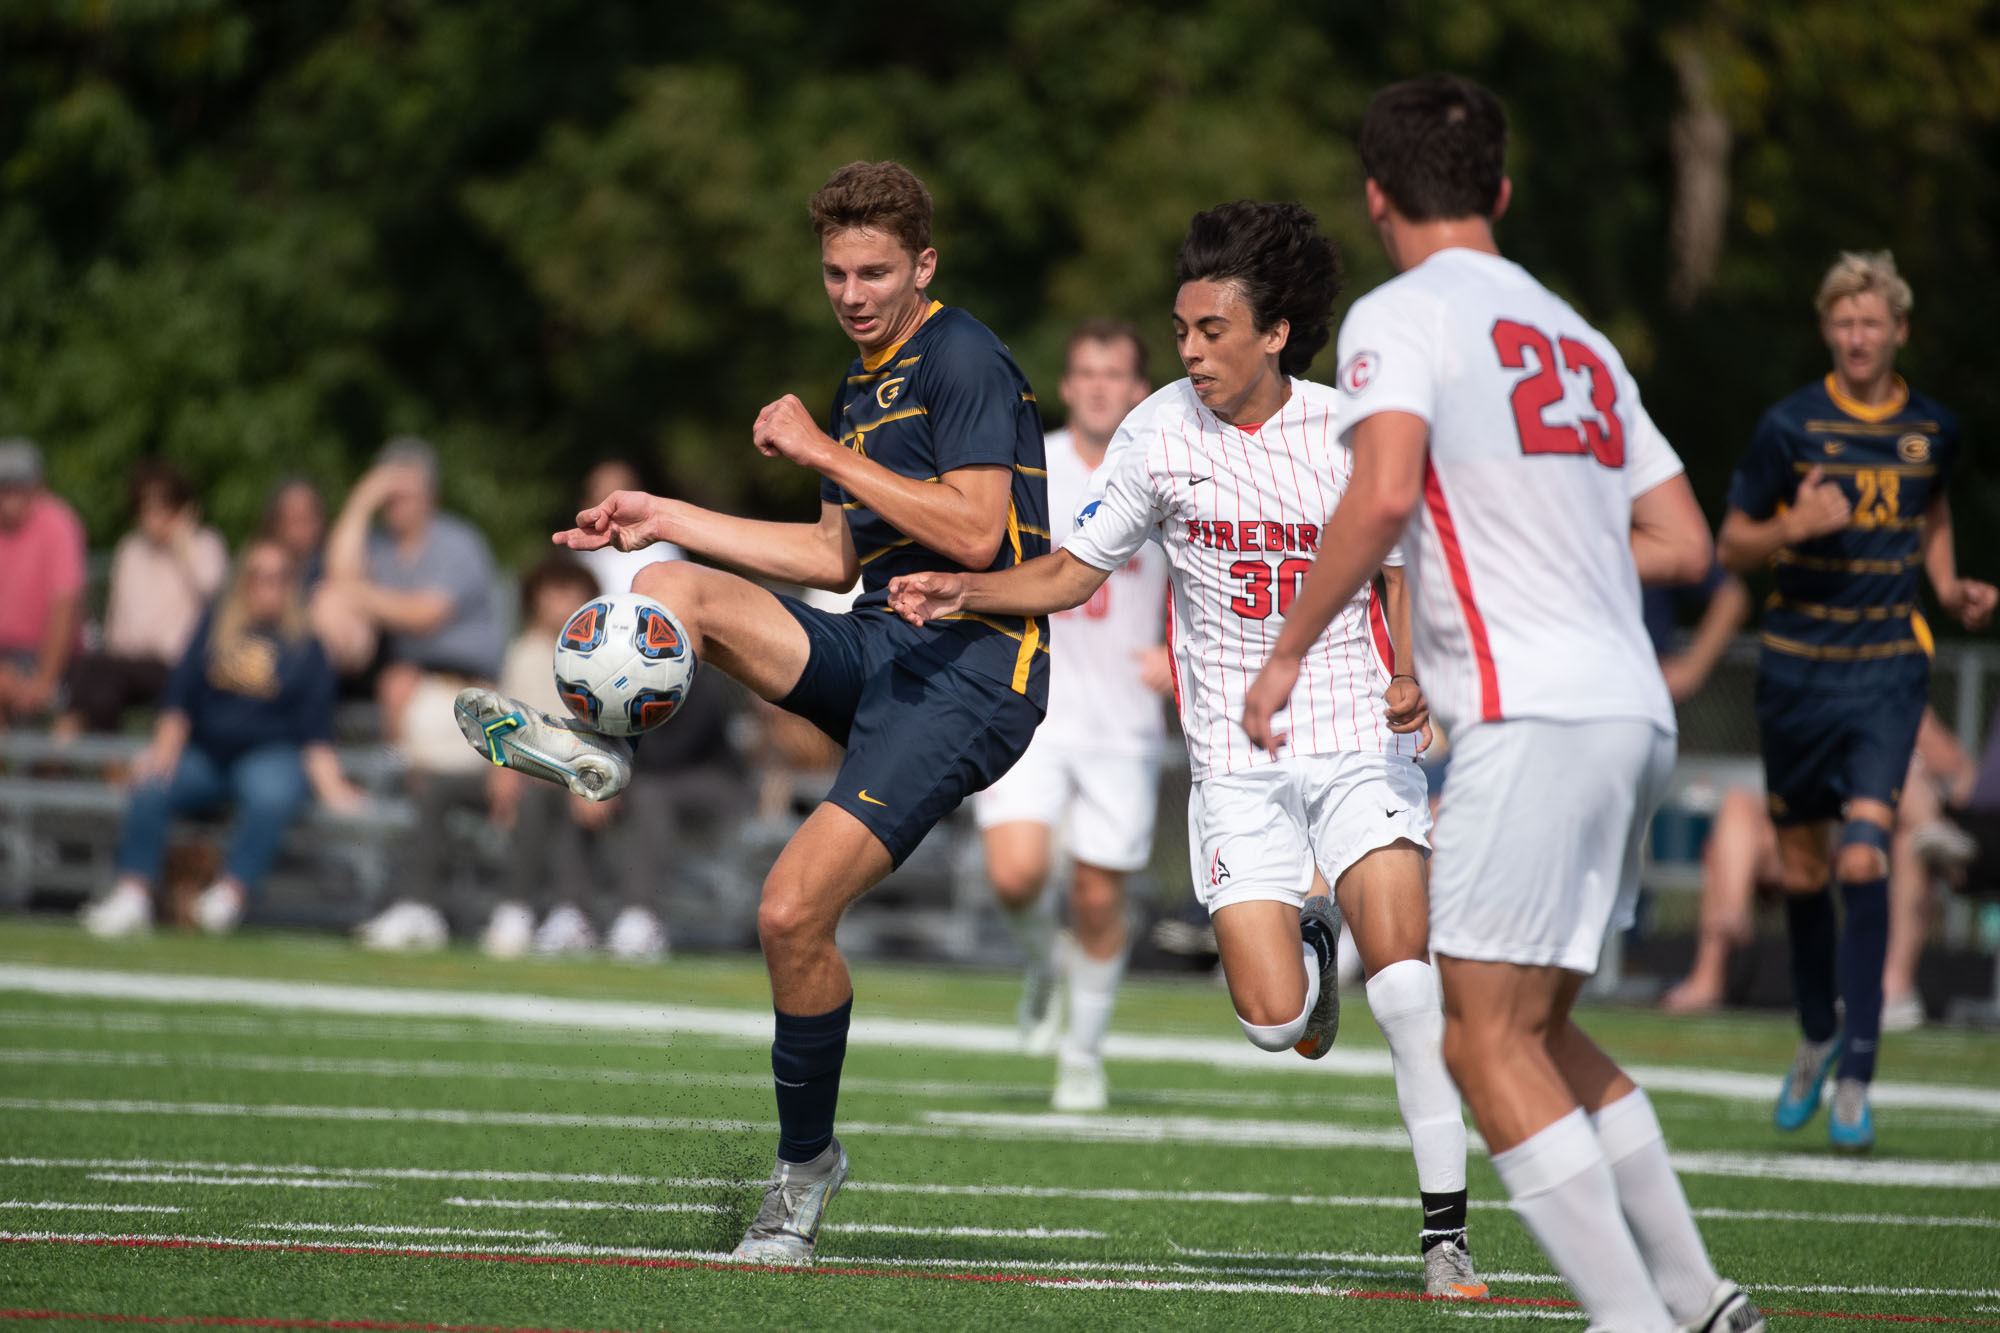 Donovan's Early Strike Powers Blugolds Over Loras